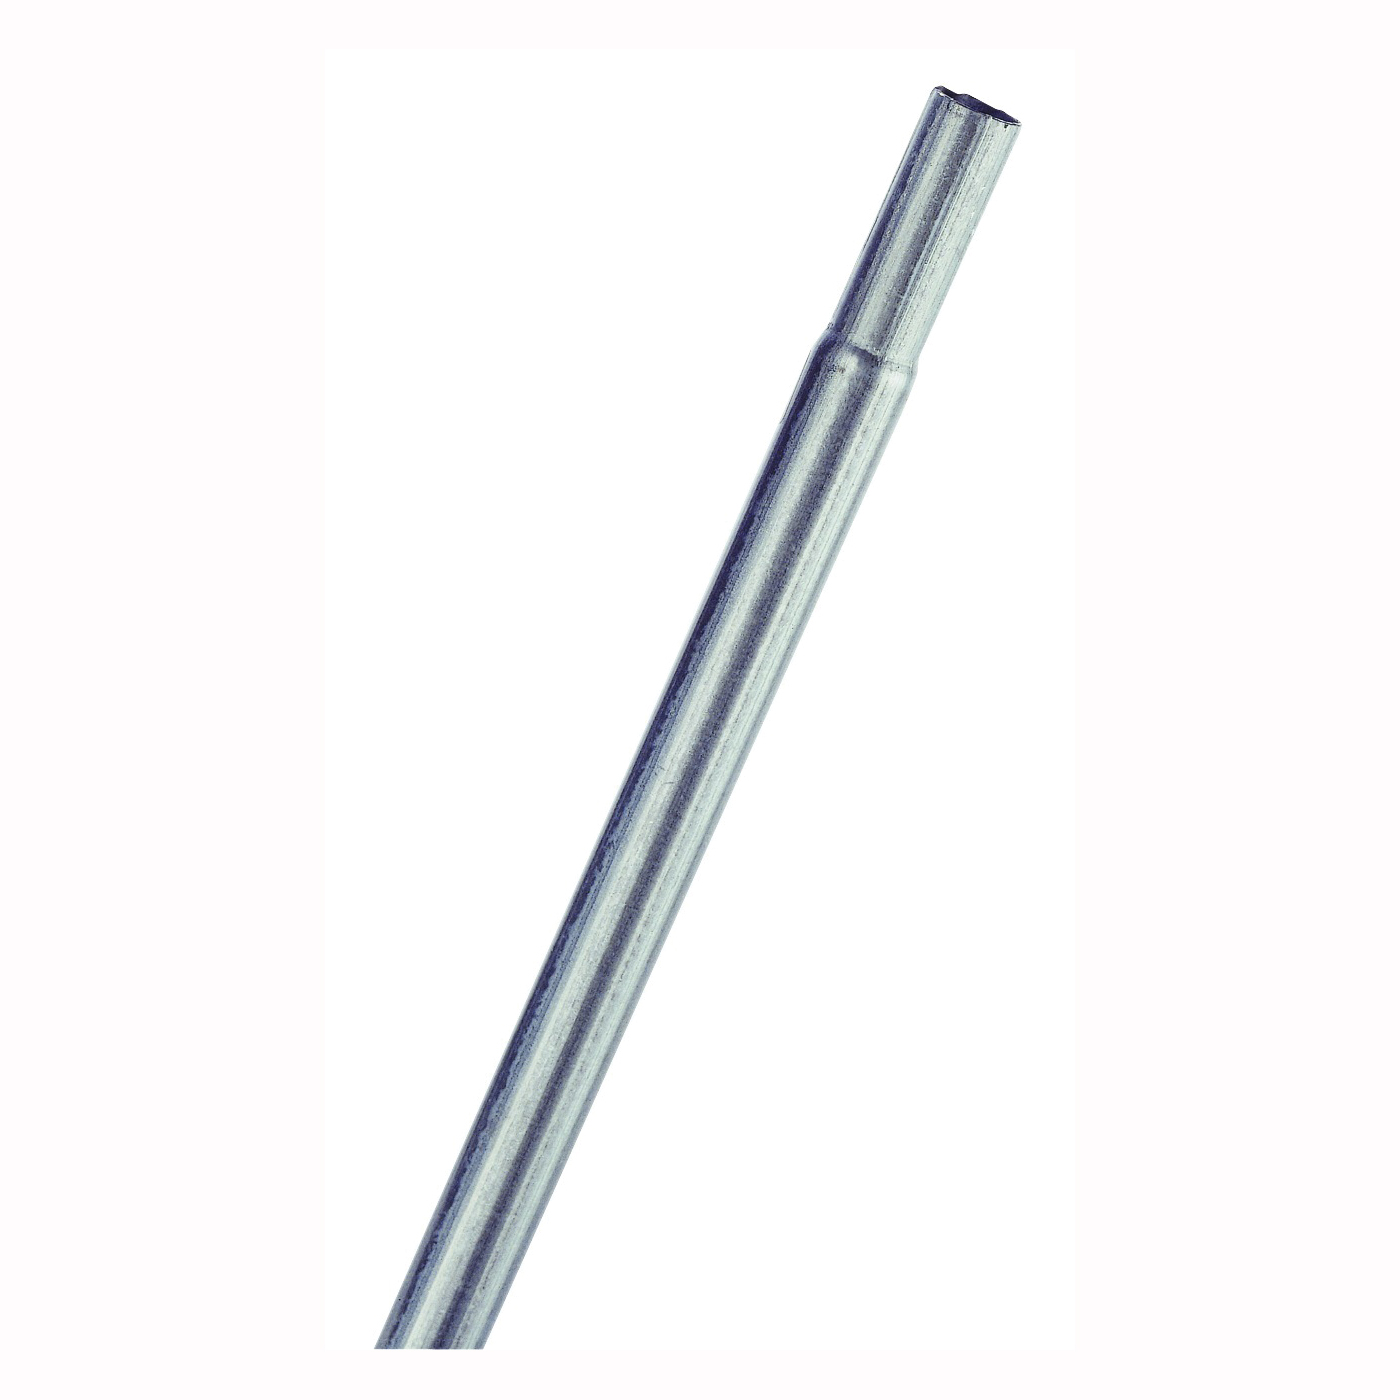 PR103110.5 Swedge End Top Rail, 1-3/8 in Dia, 10.6 ft L, 18 Thick Material